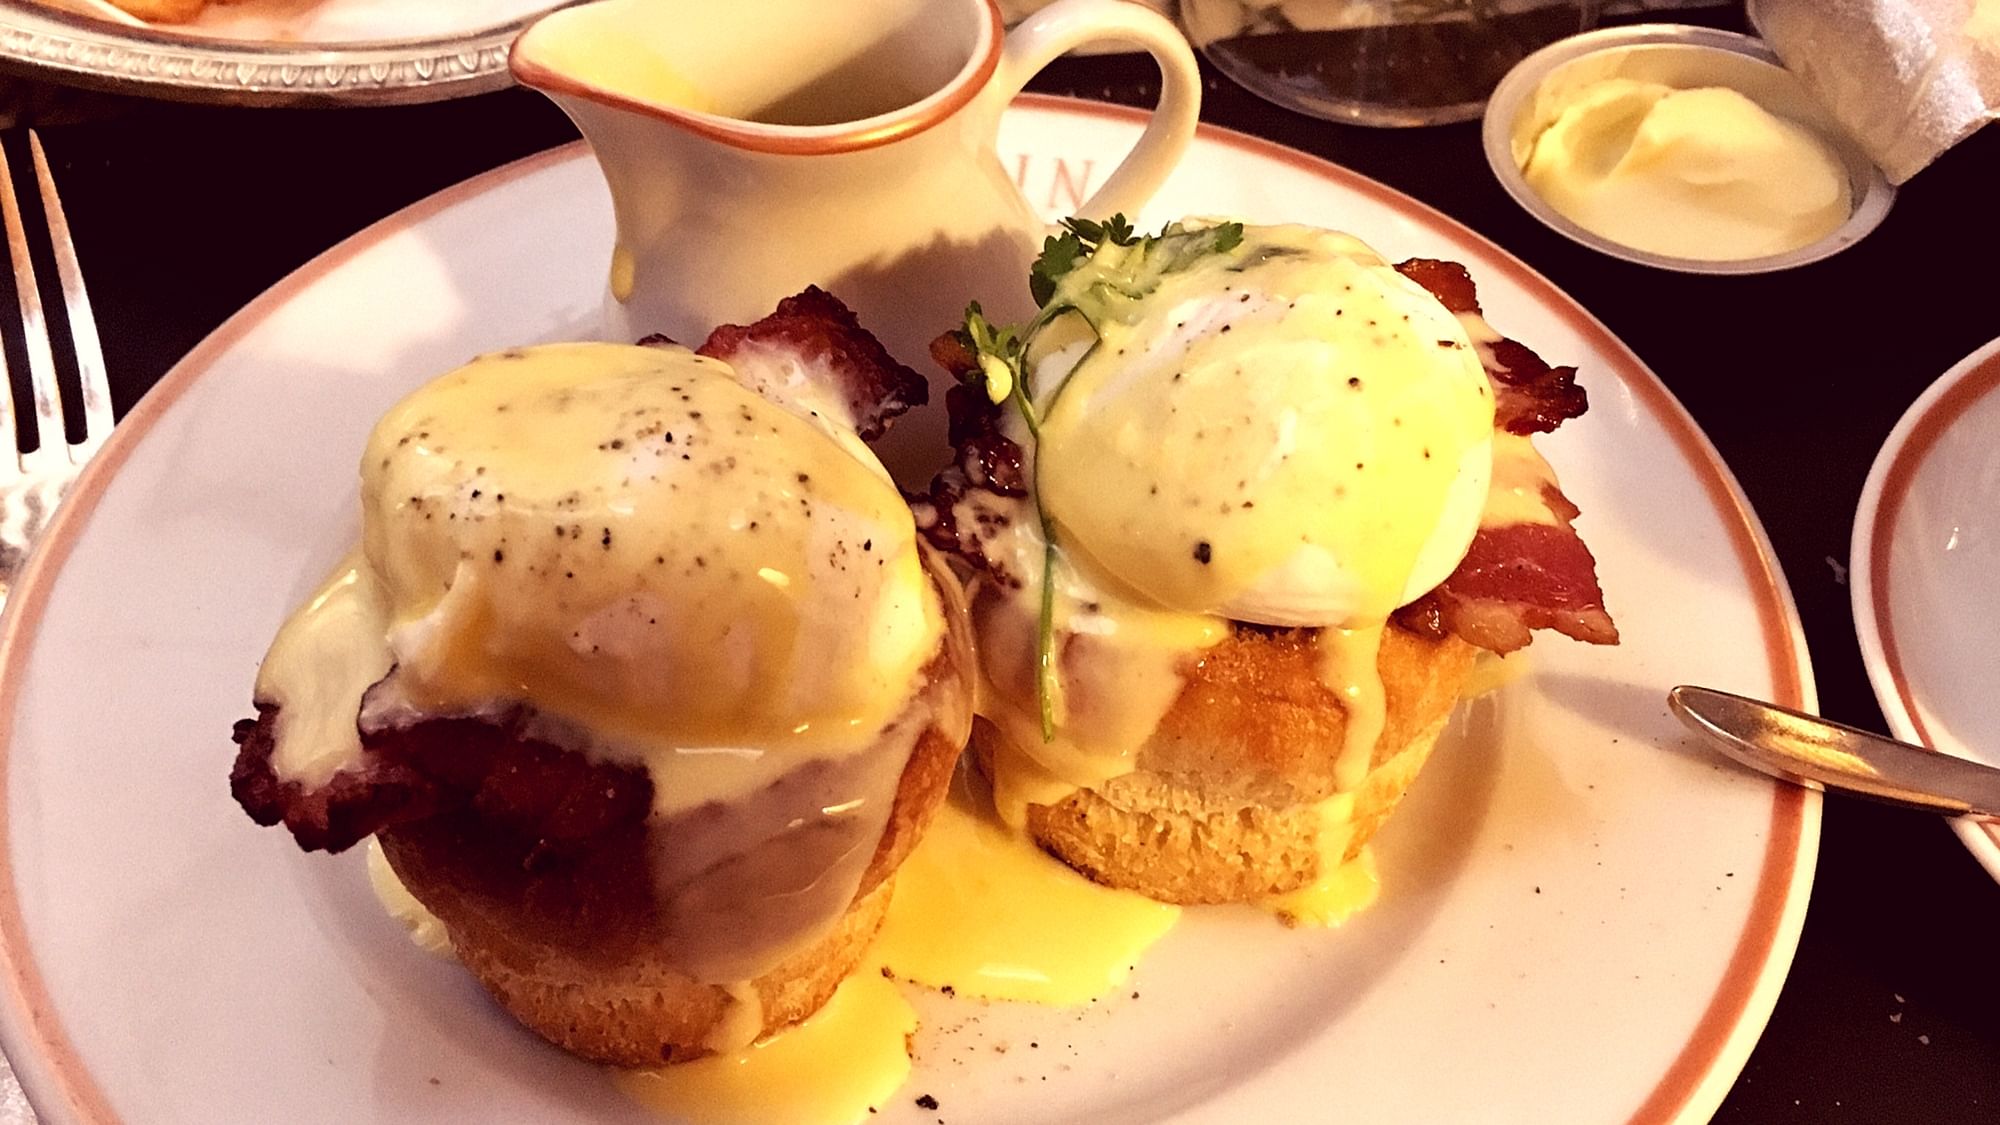 The delicious Eggs Benedict at Angelina.